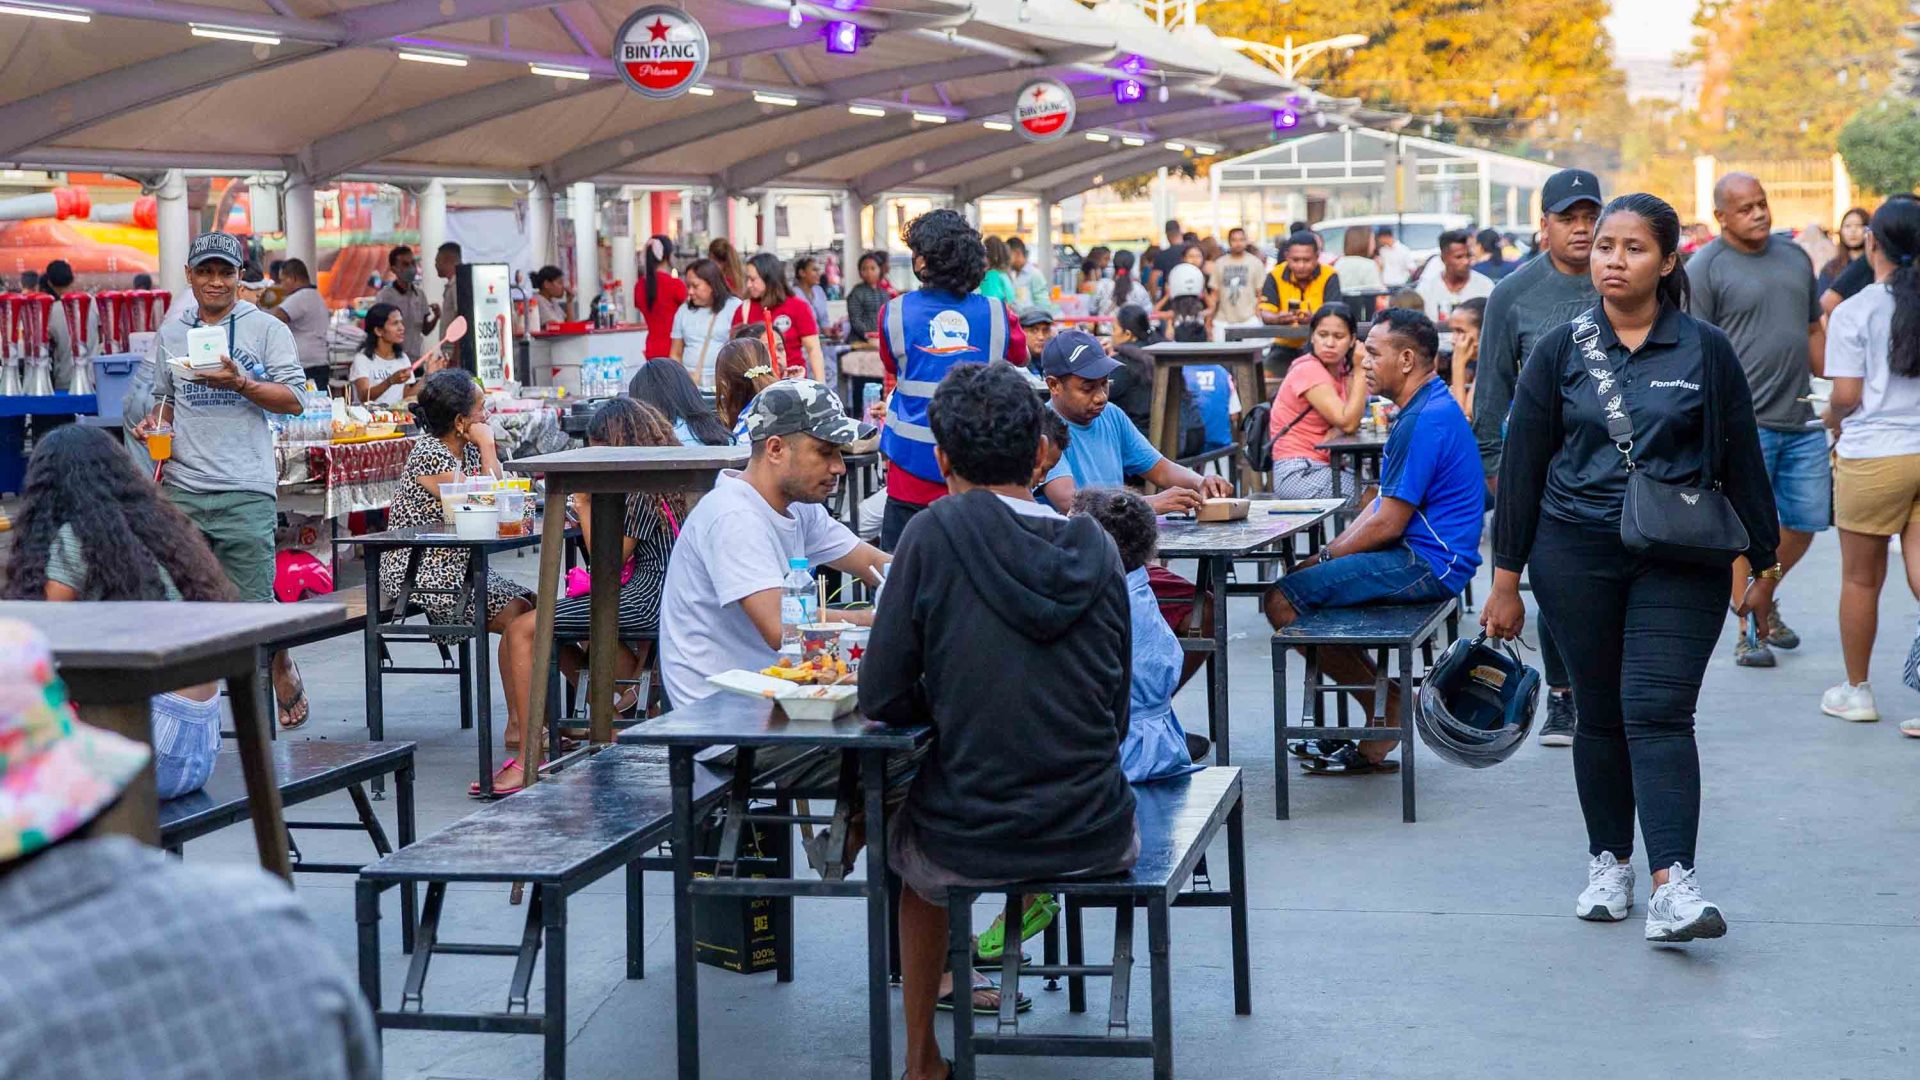 People sit and eat and stroll around Timor Plaza for its Saturday night market.